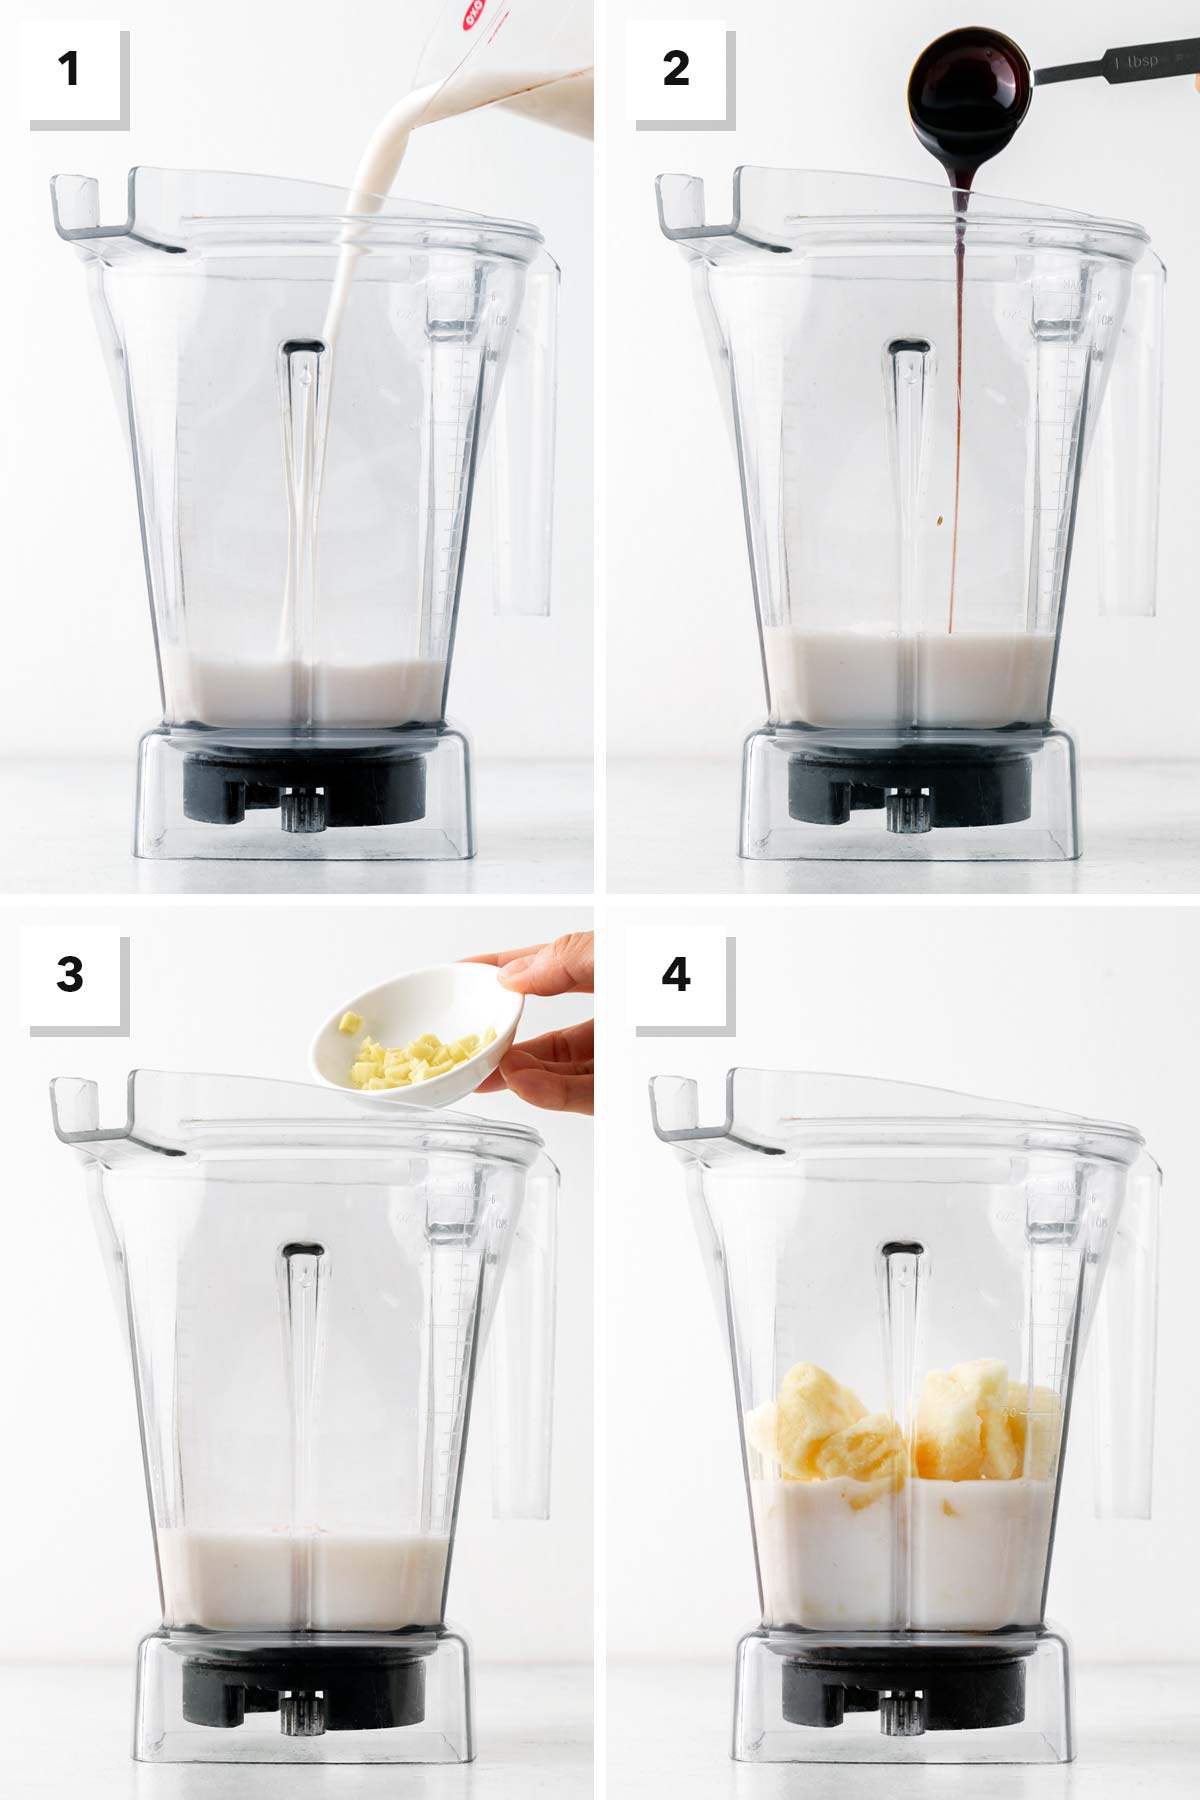 Steps for making a pineapple ginger smoothie.